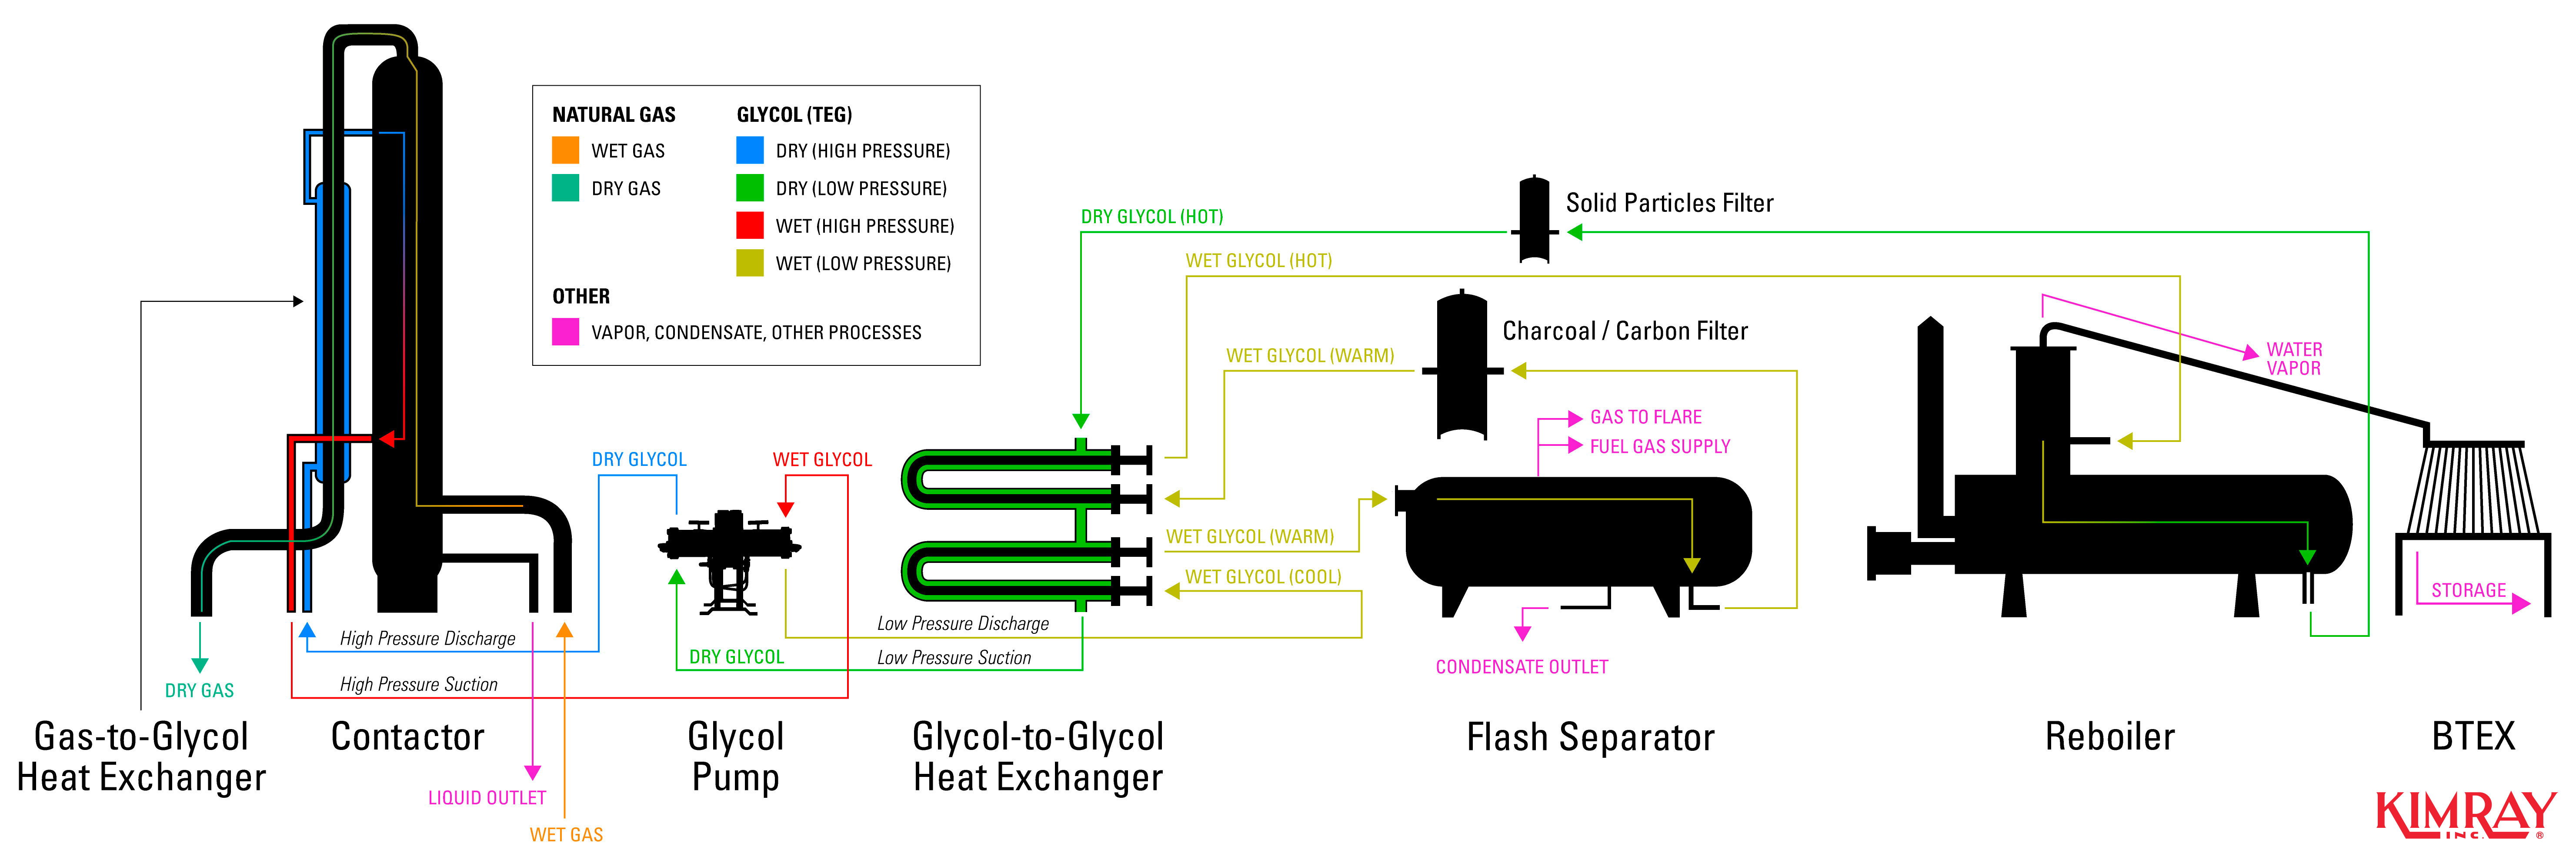 dehydration system illustration overview with all standard vessels and equipment